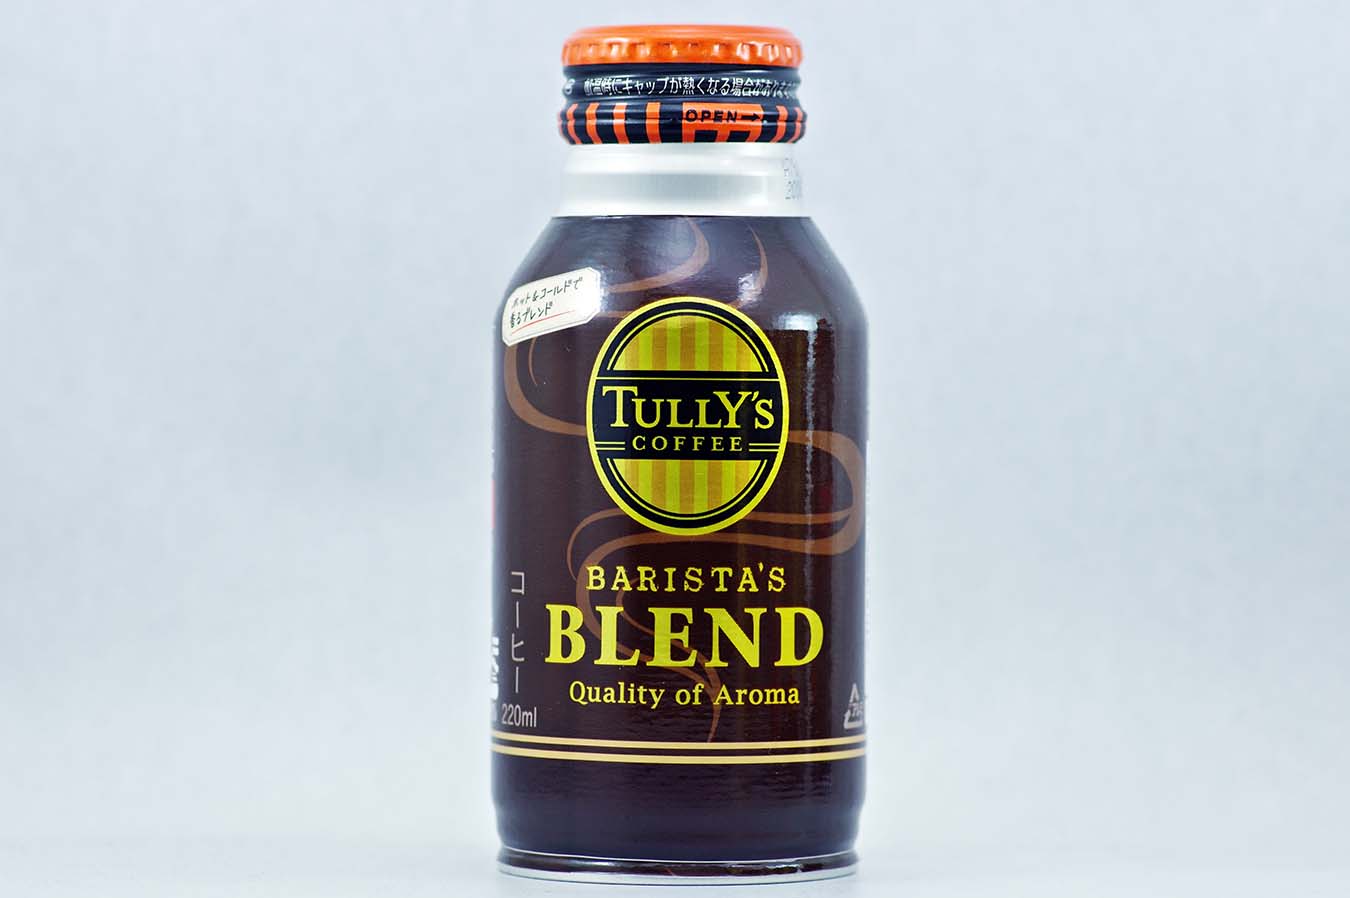 TULLY'S COFFEE BARISTA'S BLEND 2015年9月